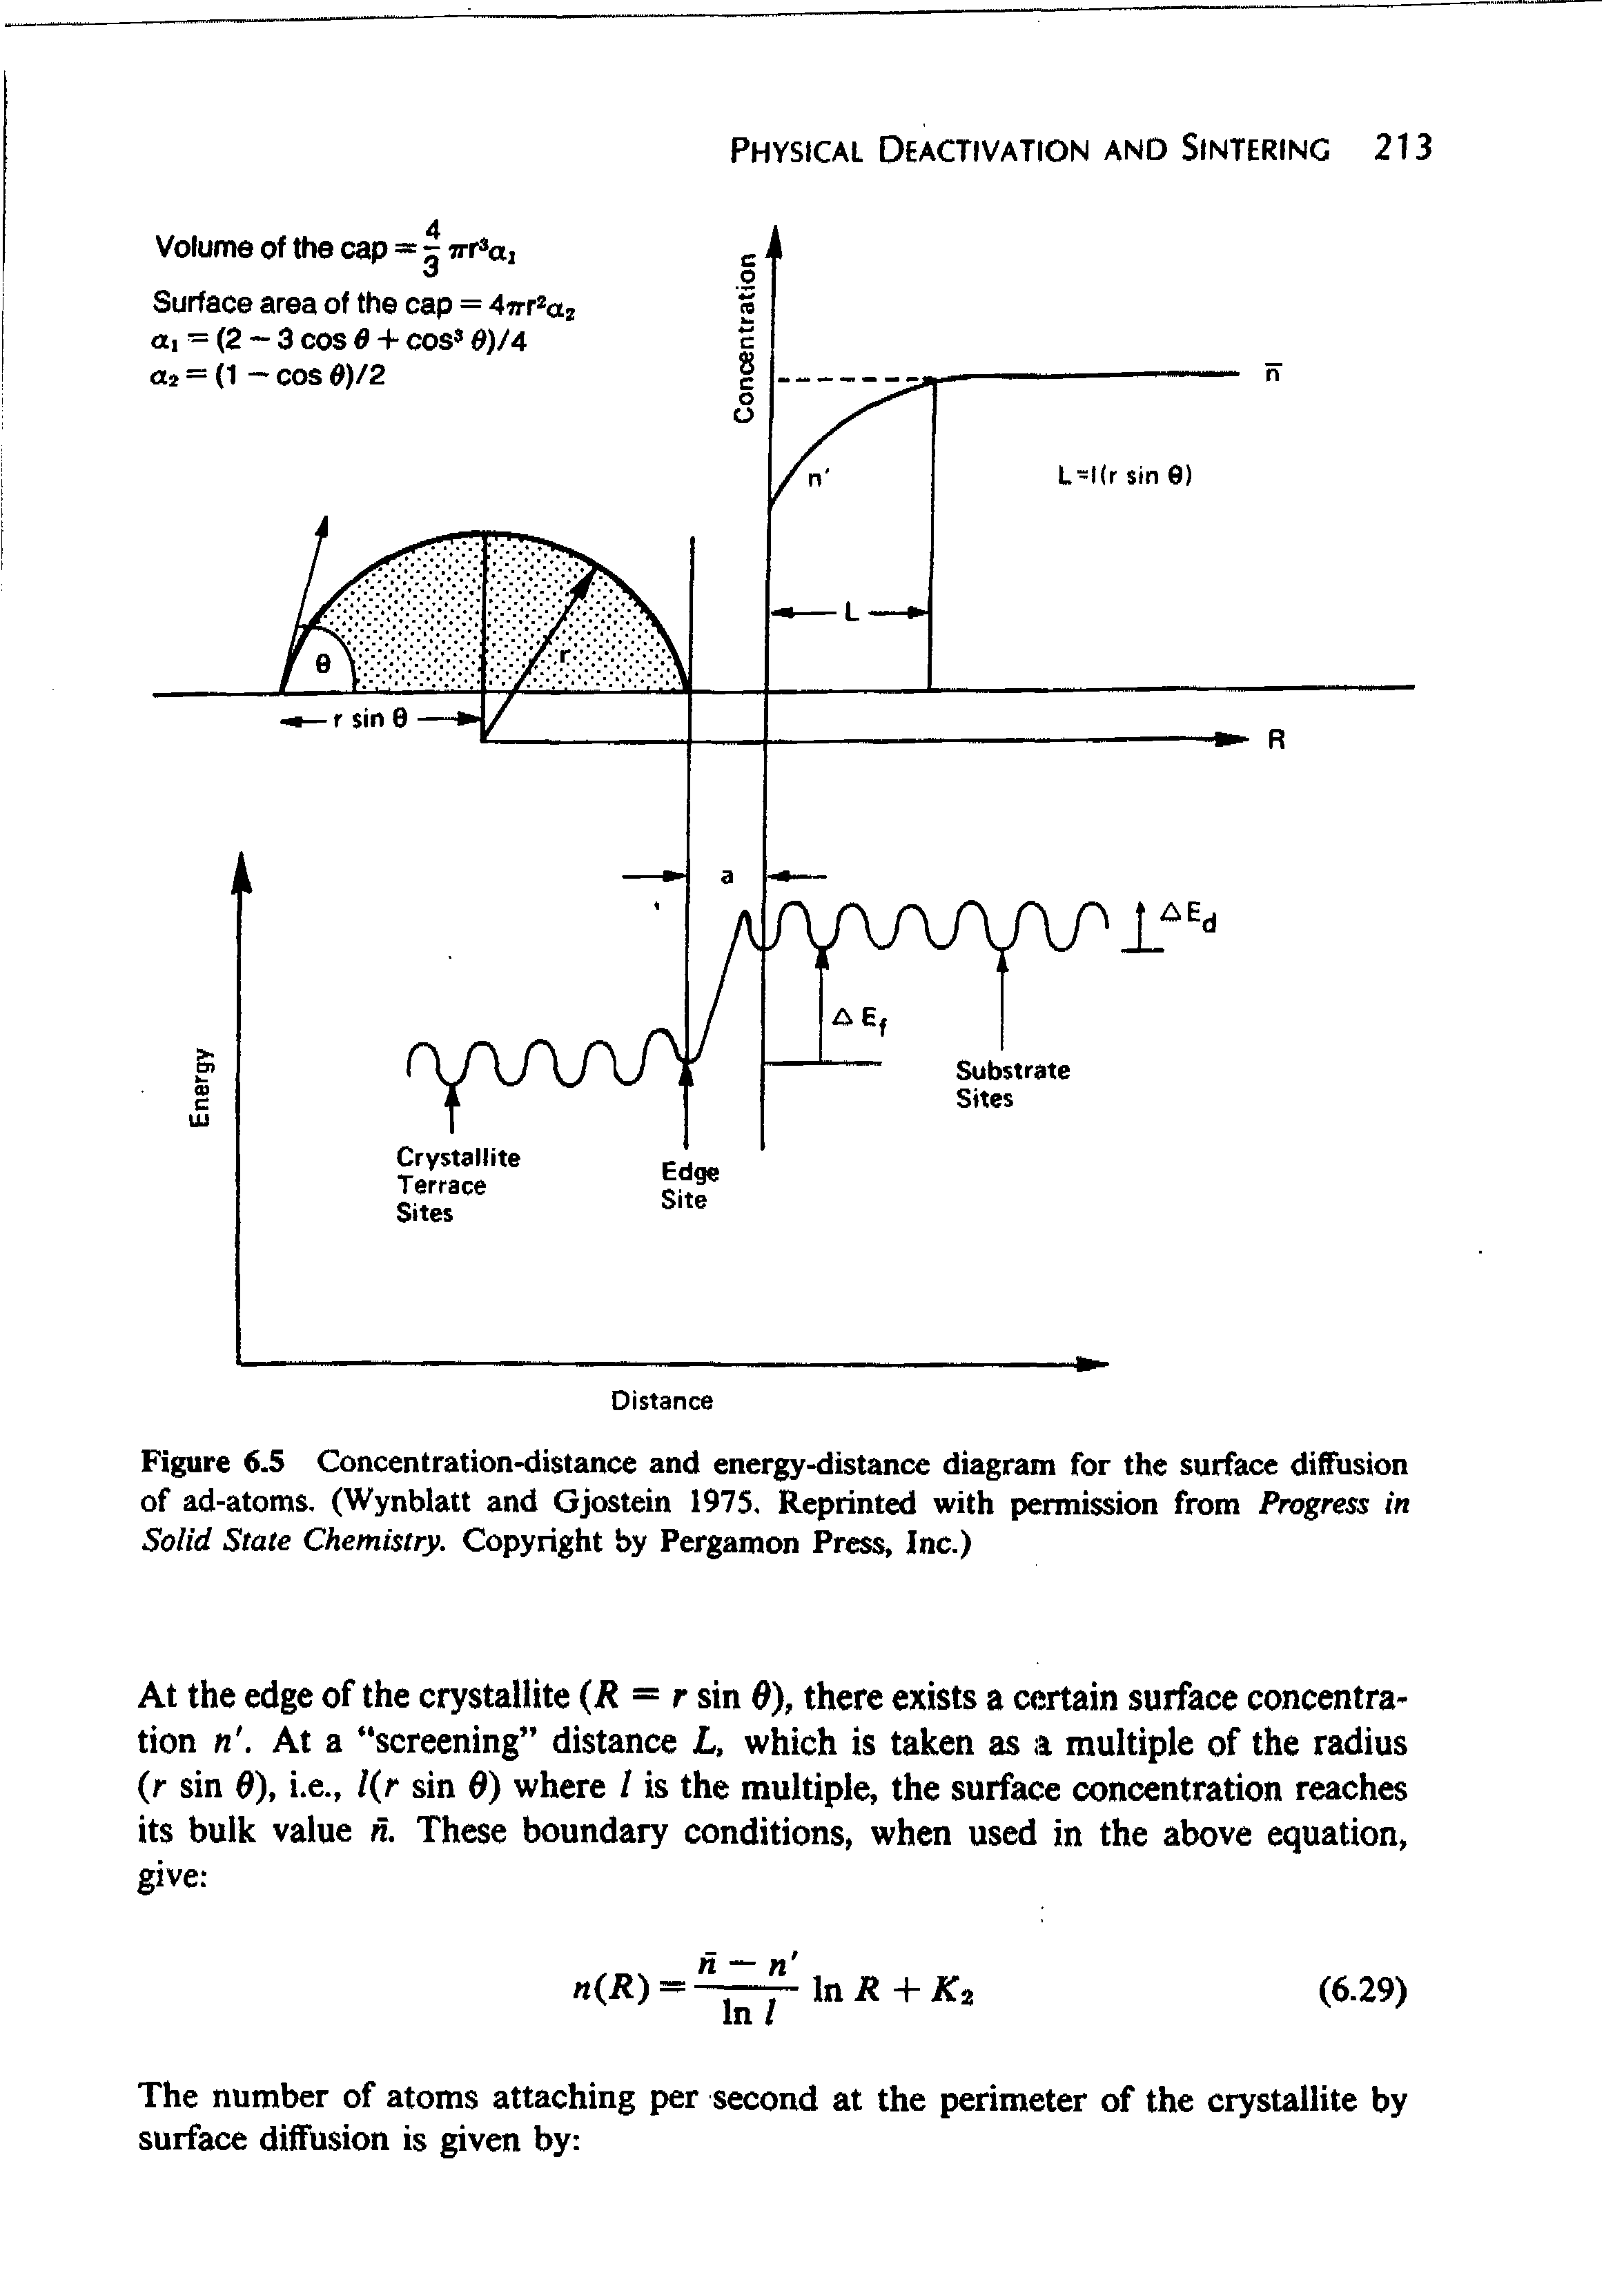 Figure 6.5 Concentration-distance and energy-distance diagram for the surface diffusion of ad-atoms. (Wynblatt and Gjostein 1975. Reprinted with permission from Progress in Solid State Chemistry. Copyright by Pergamon Press, Inc.)...